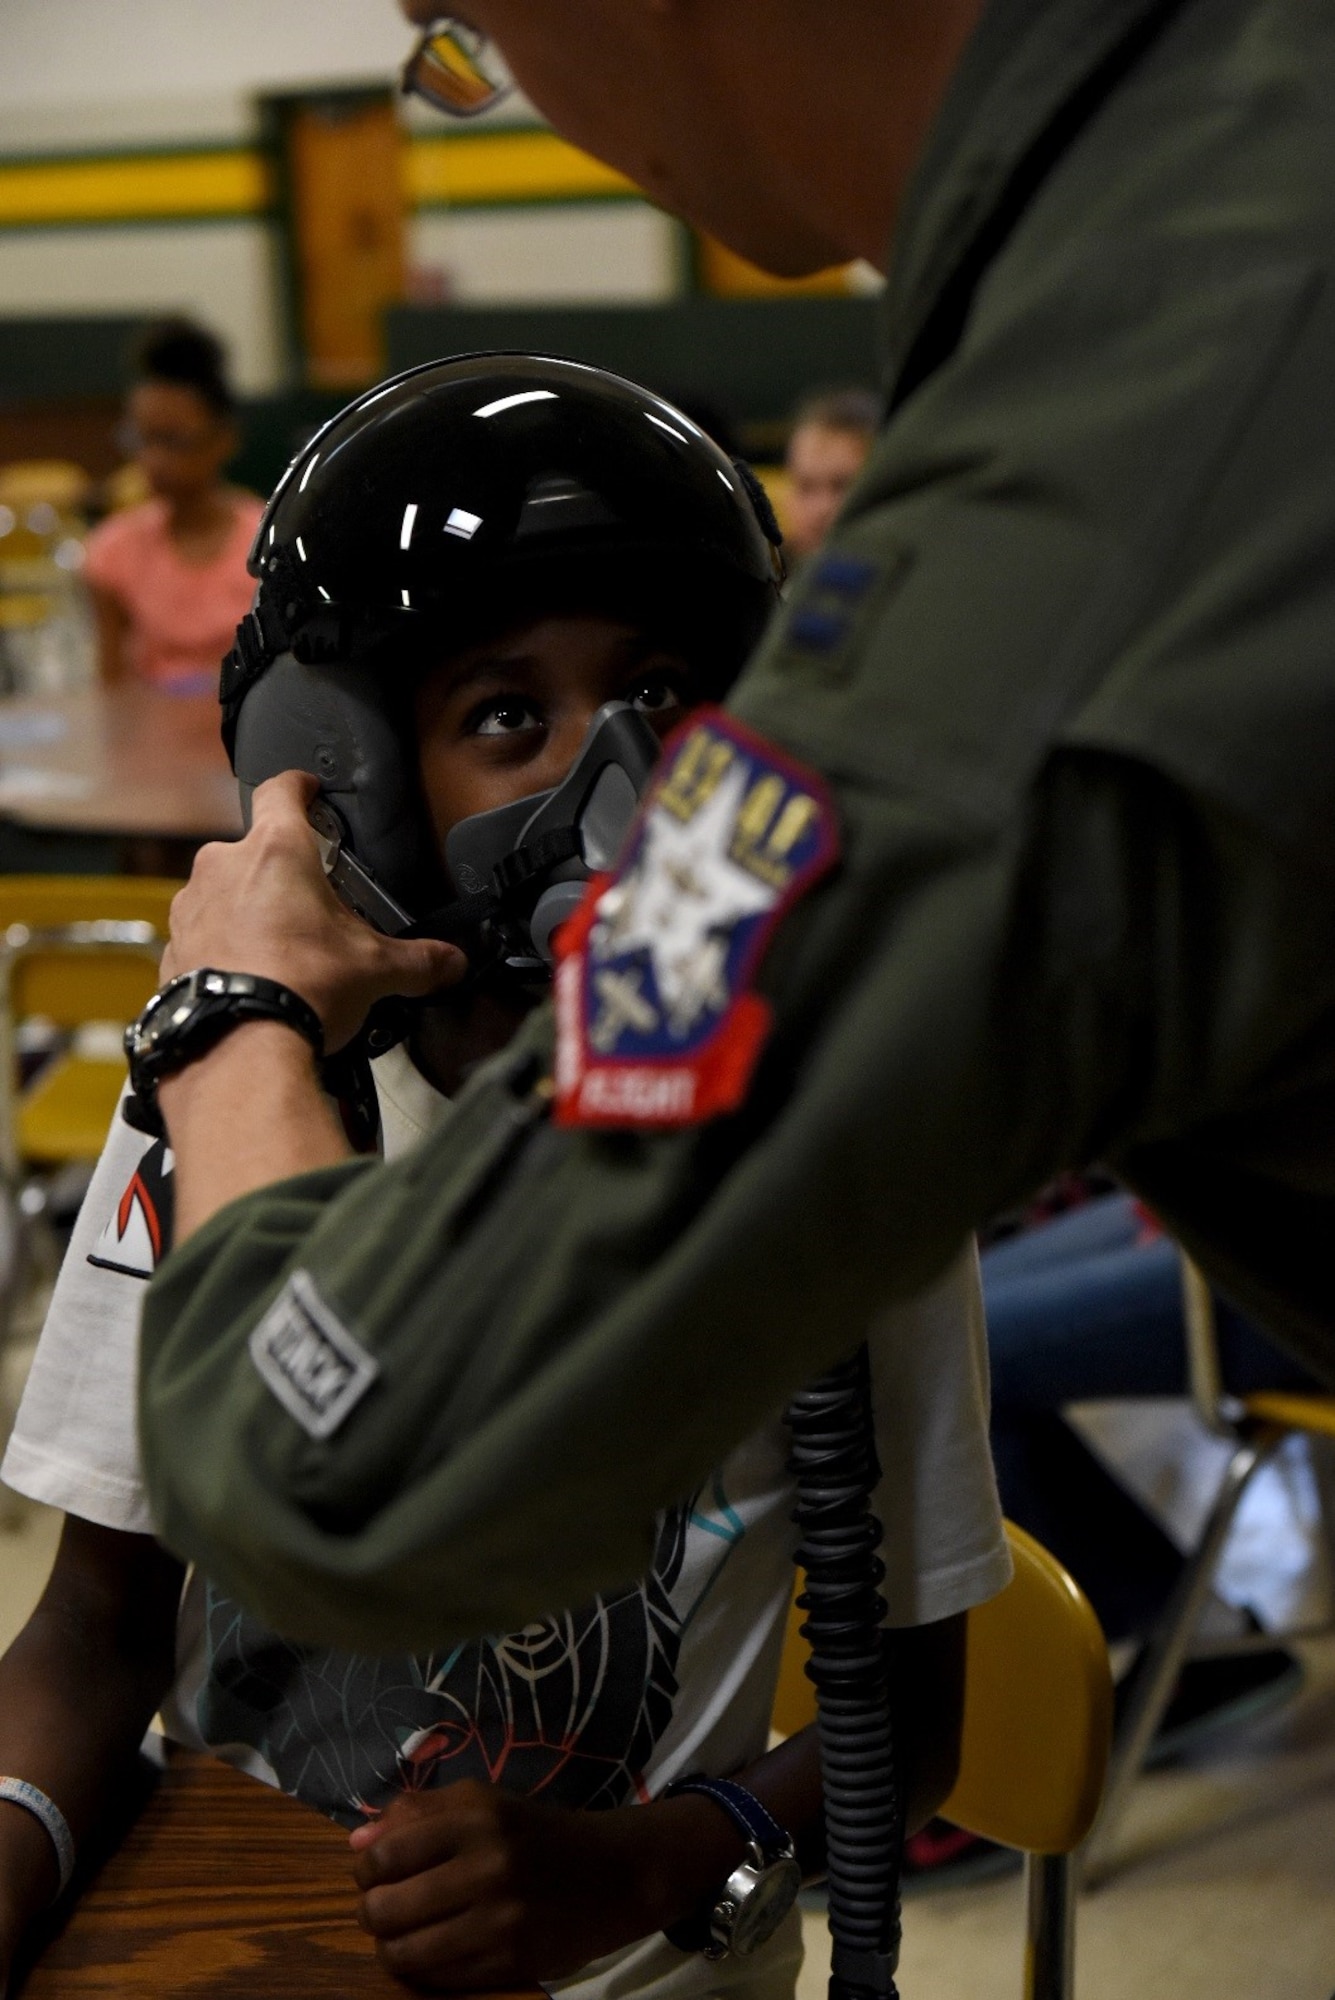 A student from Greenwood Middle School tries on a U.S. Air Force pilot’s helmet, May 19, 2017, in Goldsboro, North Carolina. Students had the opportunity to speak with both aircrew and maintainers prior to the Wings Over Wayne Air Show at Seymour Johnson Air Force Base, May 20-21, 2017.  (U.S. Air Force photo by Airman 1st Class Victoria Boyton)